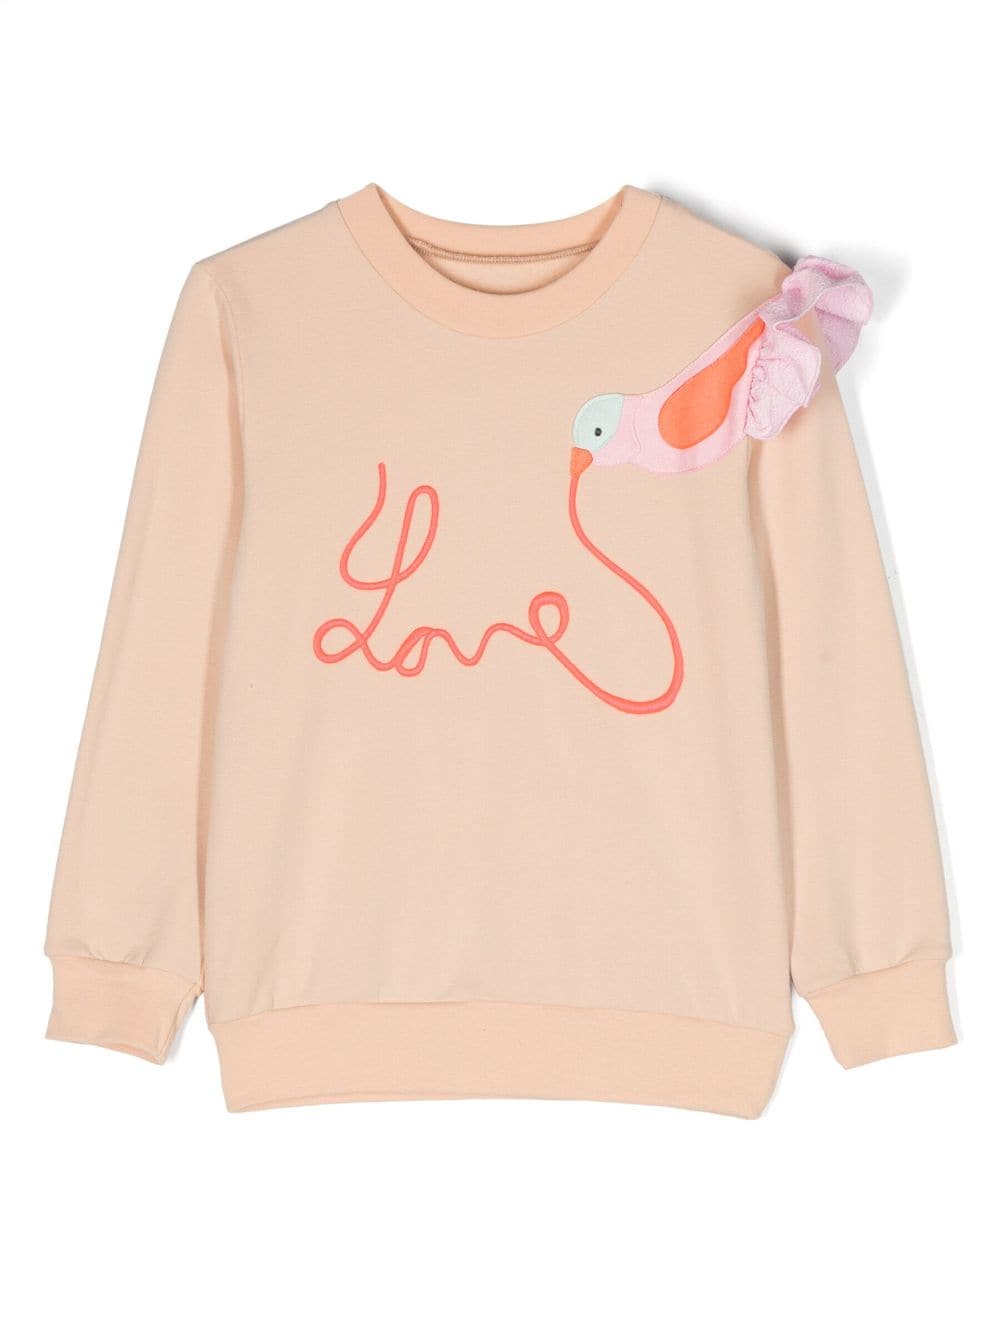 WAUW CAPOW by BANGBANG Lucia Love embroidered-motif sweatshirt - Neutrals von WAUW CAPOW by BANGBANG